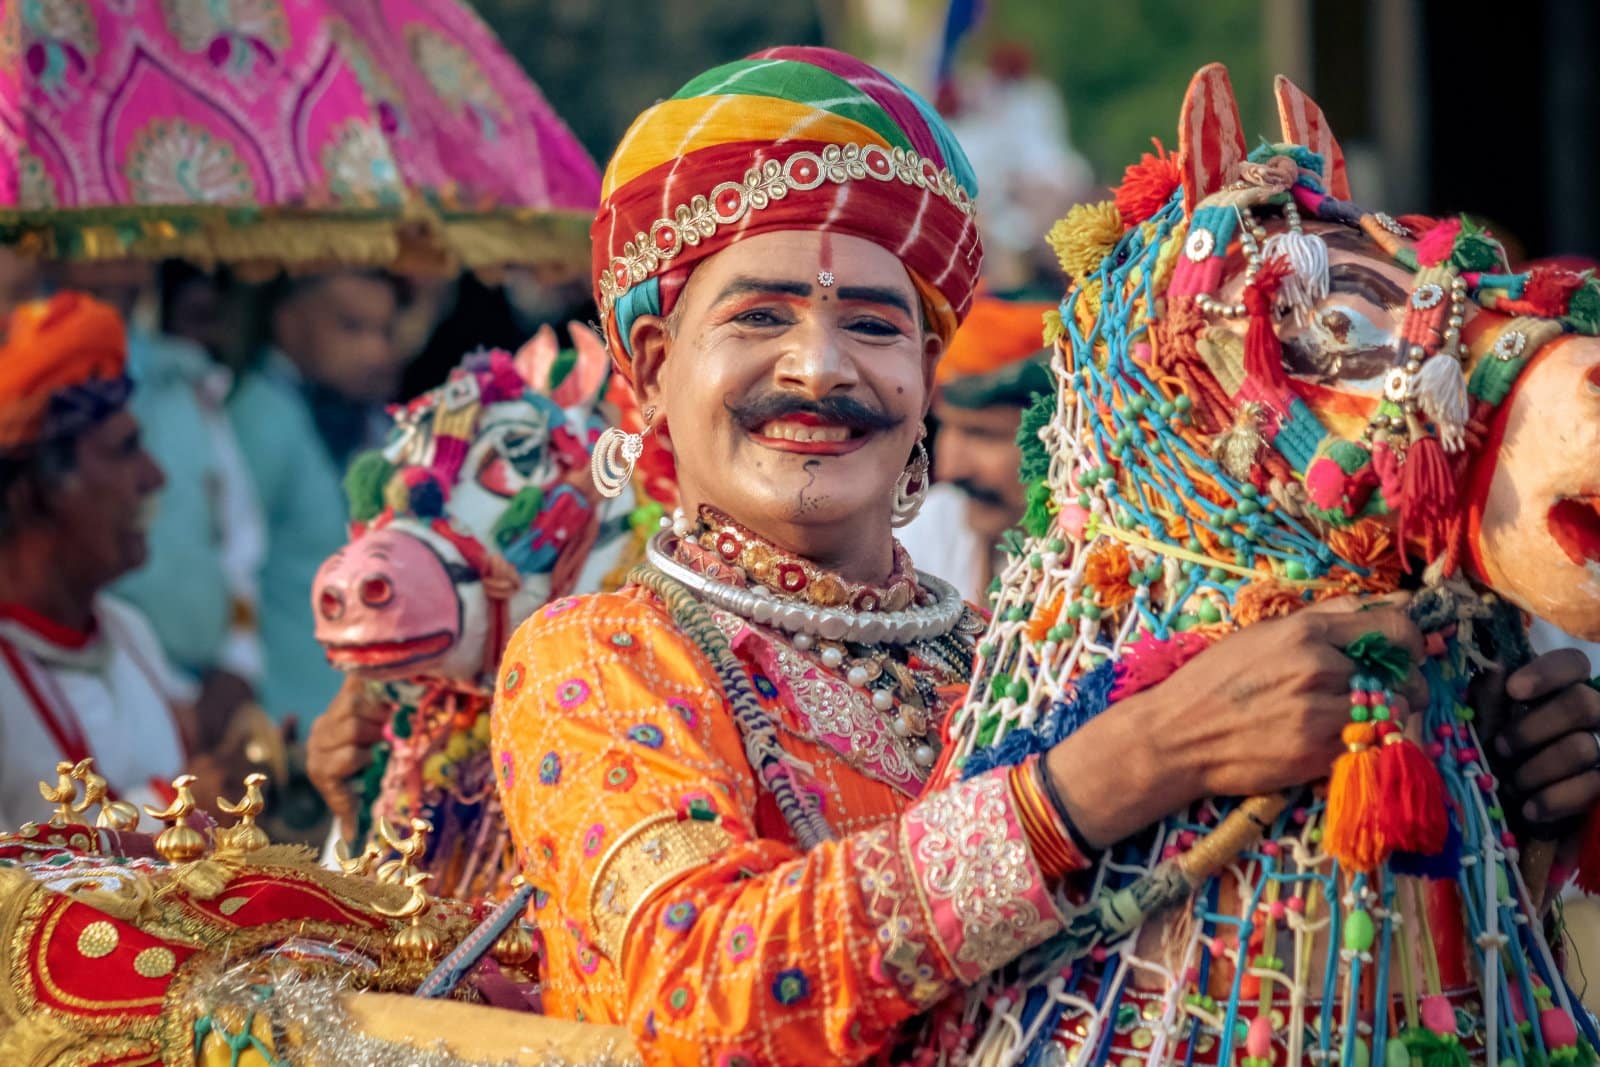 <p class="wp-caption-text">Image Credit: Shutterstock / Sunil lodhwal</p>  <p><span>Jaipur is not only famous for its historic architecture but also for its rich folk culture. Experiencing a traditional Rajasthani cultural performance is a must-do when visiting Jaipur. These performances include folk music, dance, and puppet shows that tell tales of heroism, love, and the everyday life of Rajasthan’s people. The colorful costumes, lively music, and graceful dance moves of the performers make for an unforgettable evening.</span></p>